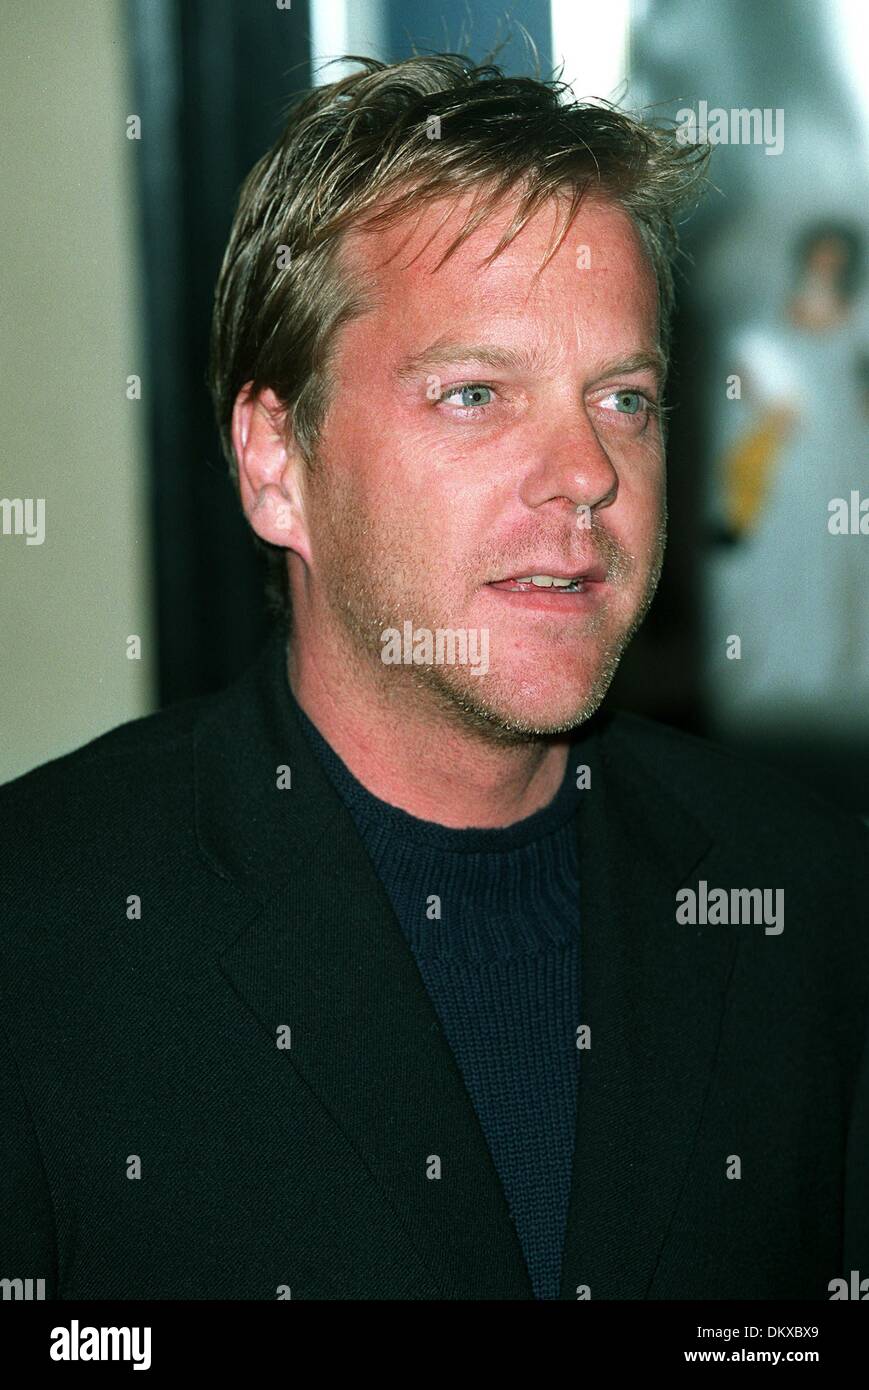 KIEFER SUTHERLAND.ACTOR.28/02/2000.X49A15C. Stock Photo